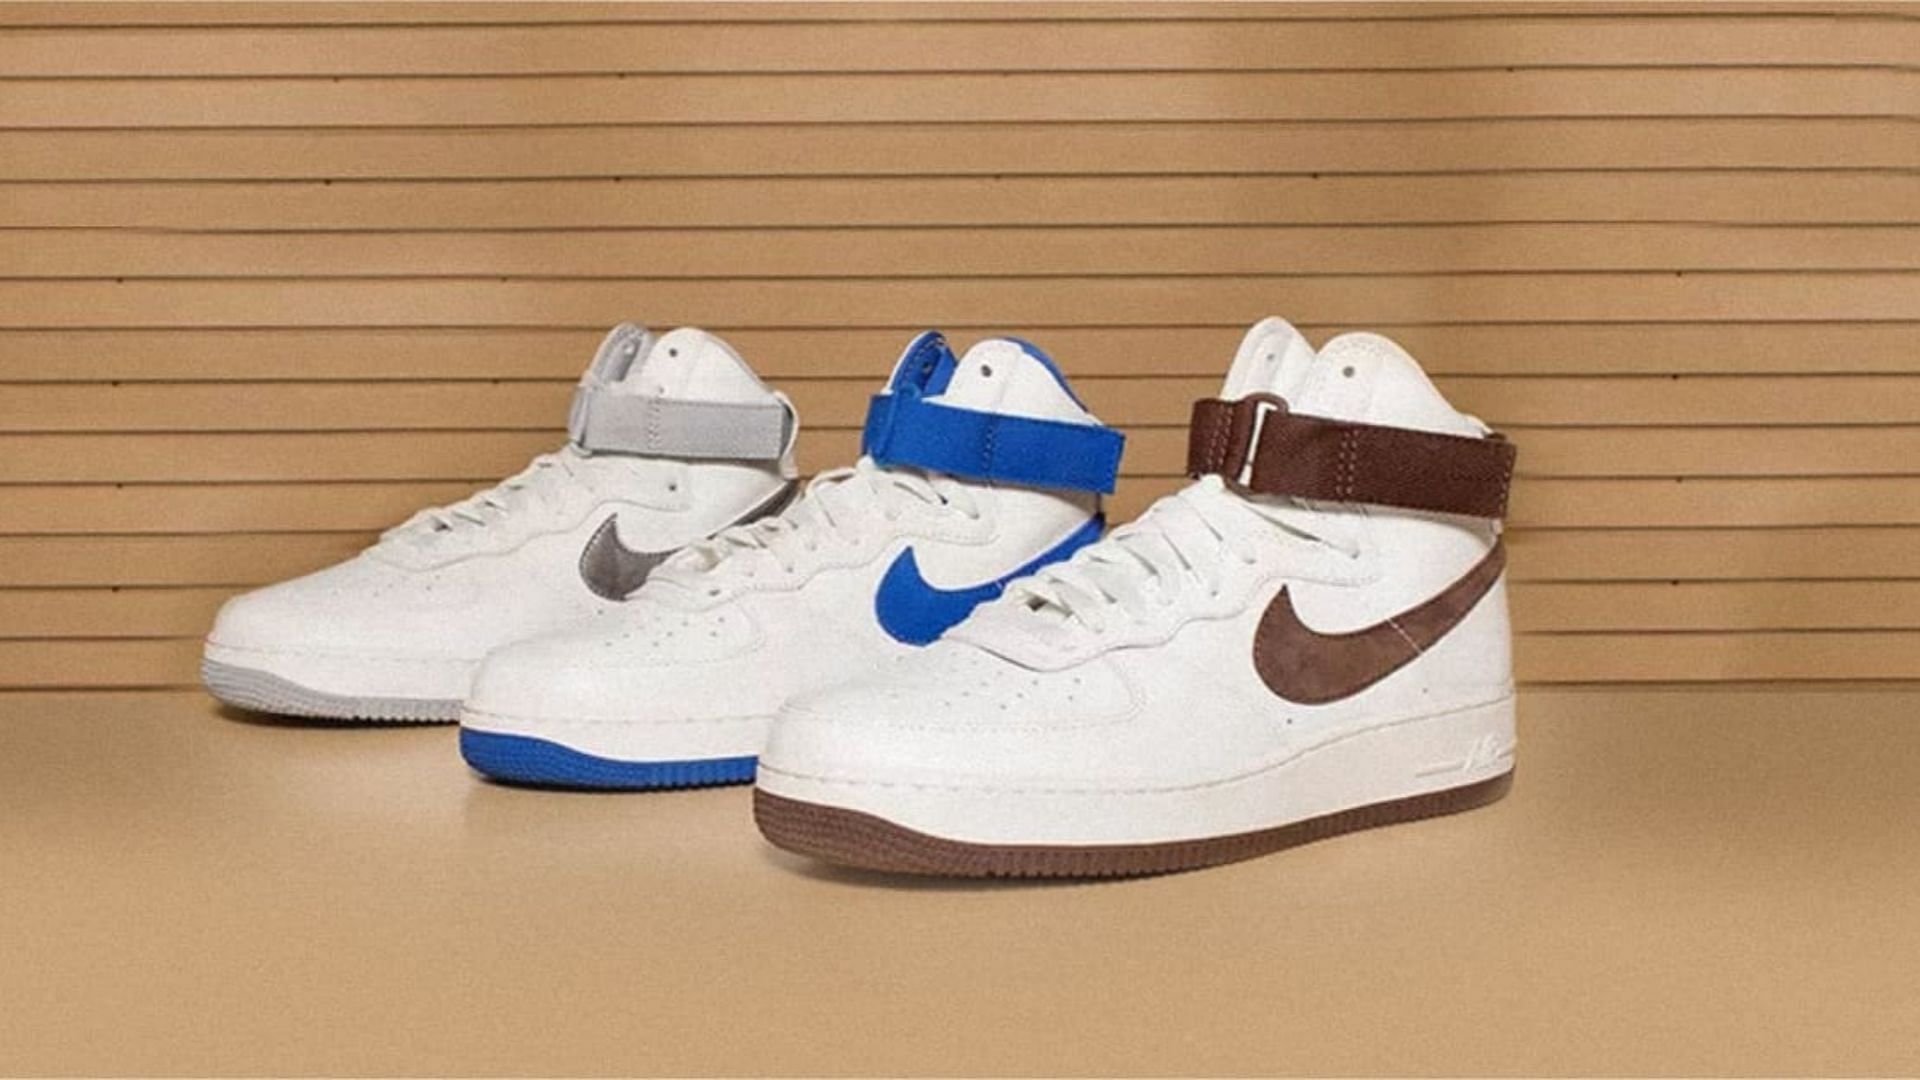 The debuted AF1 colorways in high-top silhouette (Image via Nike)